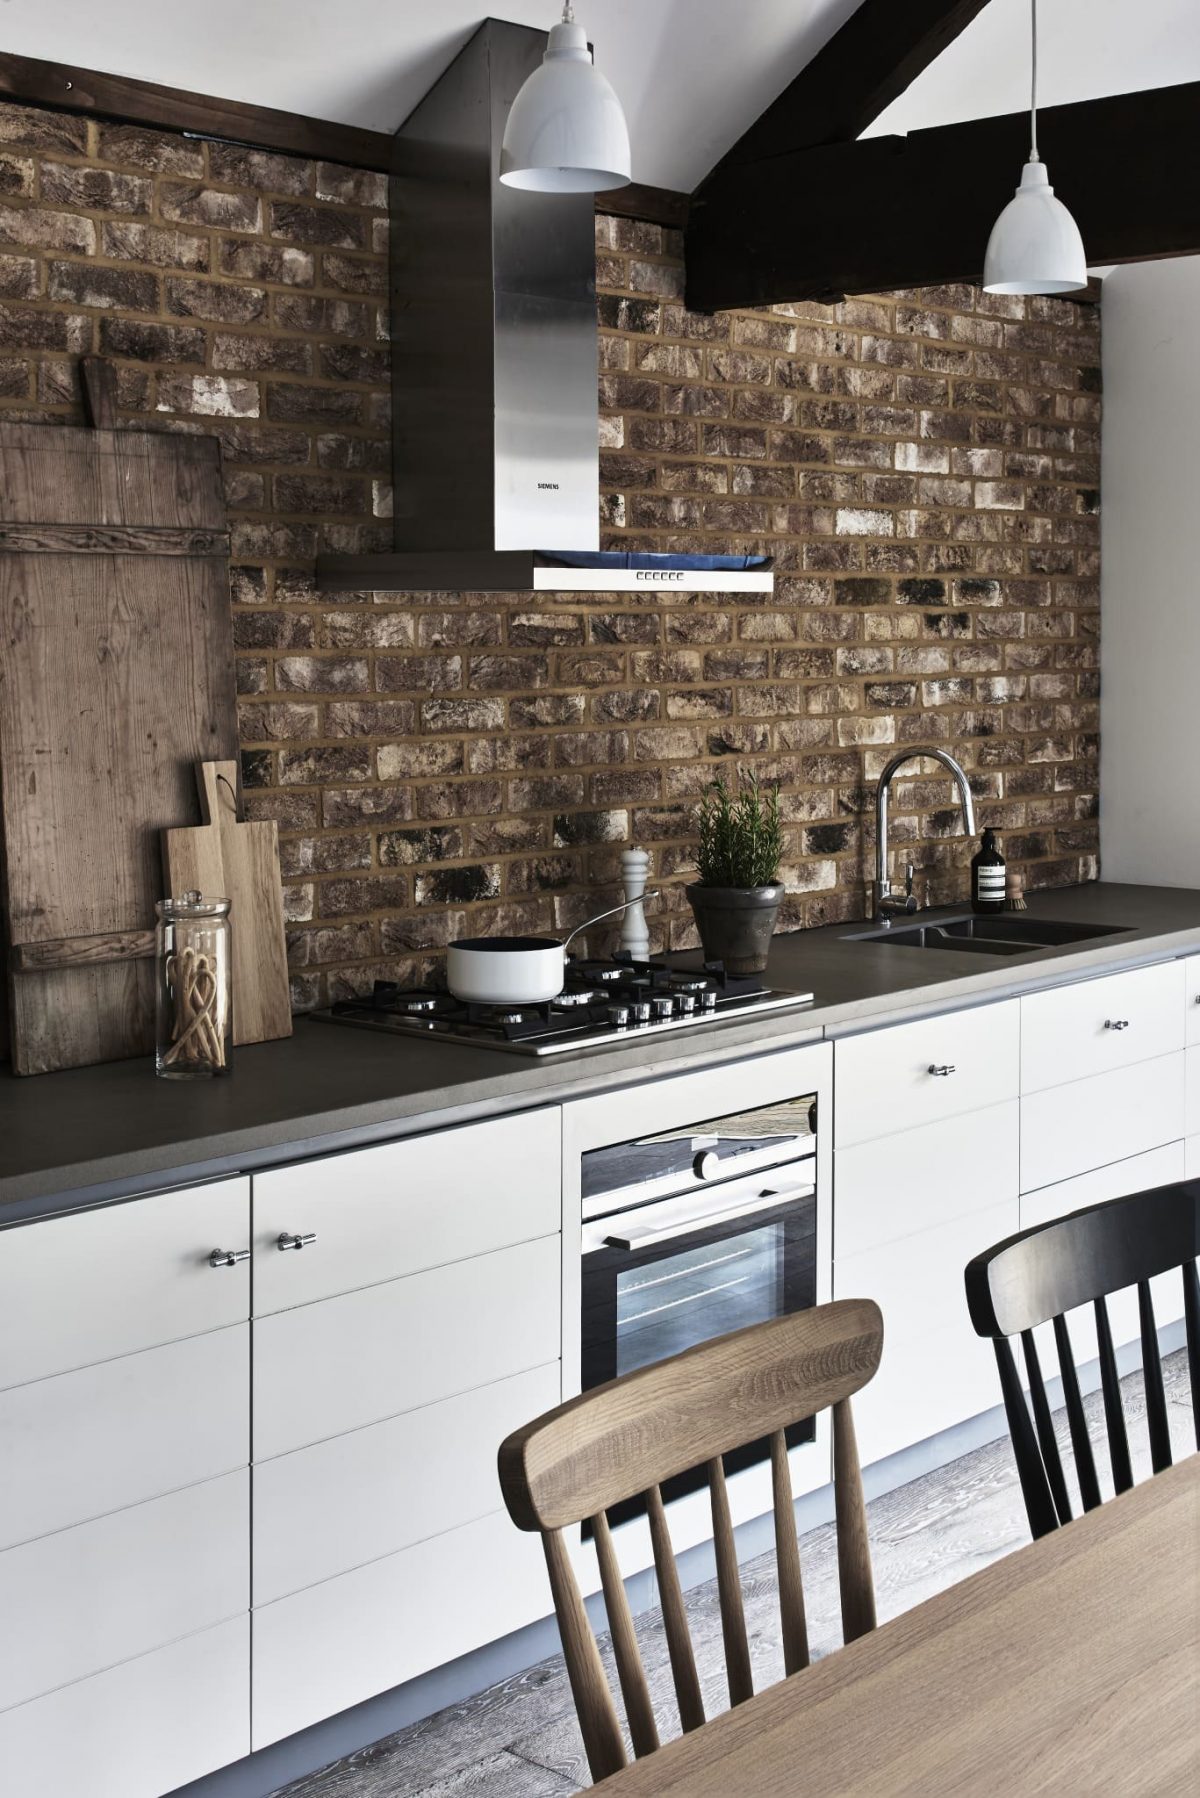 white kitchen cabinets with modern black counter top set against a bear brick wall